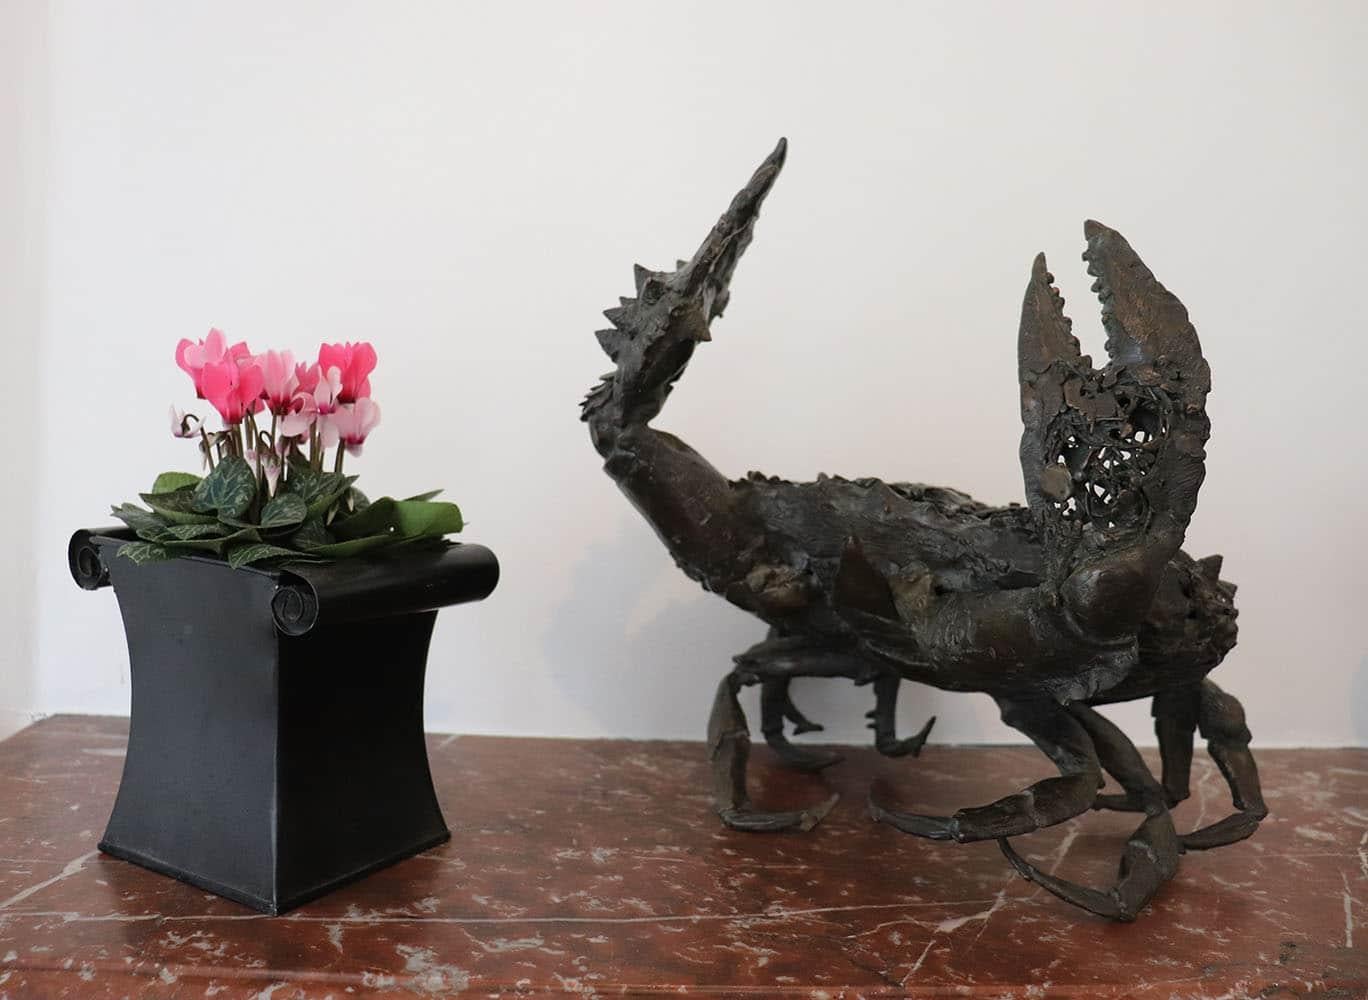 Crabe aux pattelas is a unique bronze sculpture by contemporary artist Chésade, dimensions are 38 × 31 × 30 cm (15 × 12.2 × 11.8 in). The sculpture is signed and comes with a certificate of authenticity.

This sculpture is representative of the